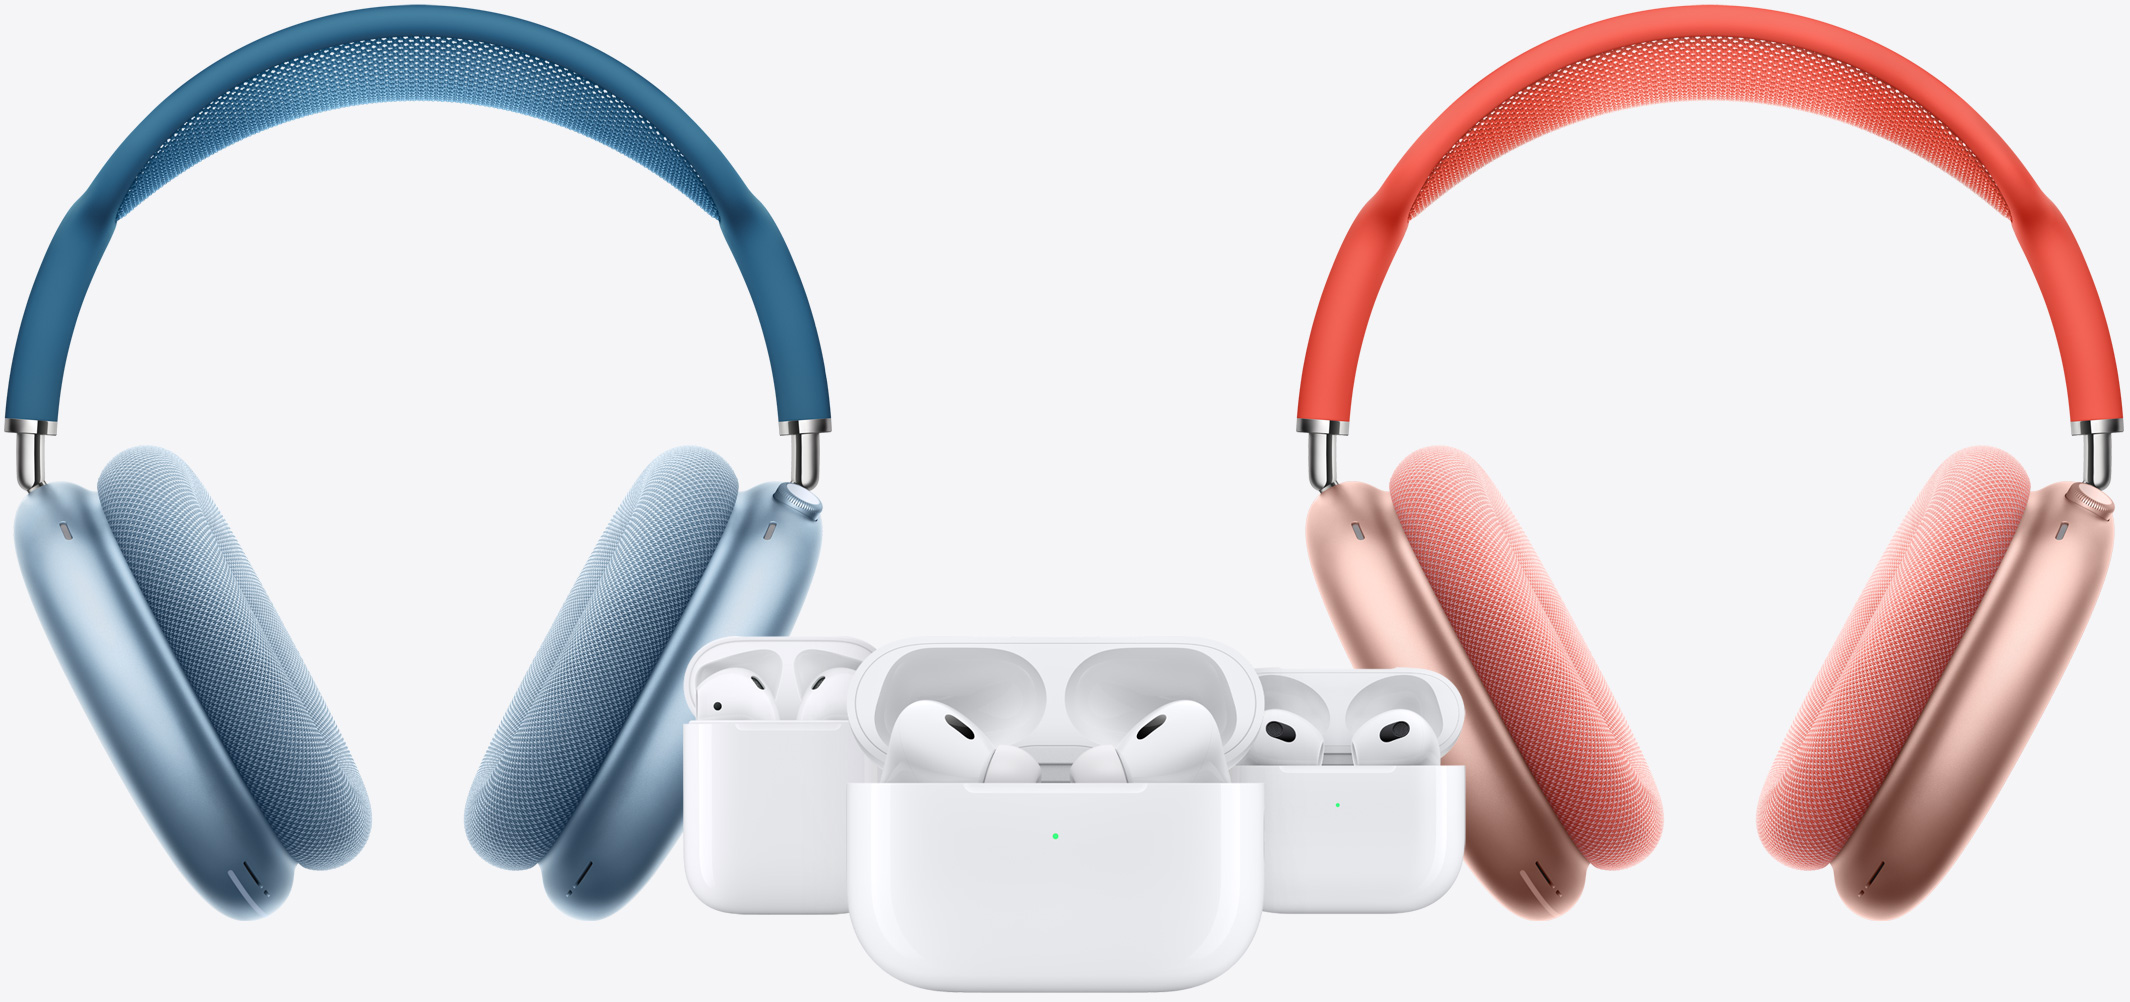 Two AirPods Max around AirPods 2nd Generation, AirPods 3rd Generation, and AirPods Pro 2nd Generation.